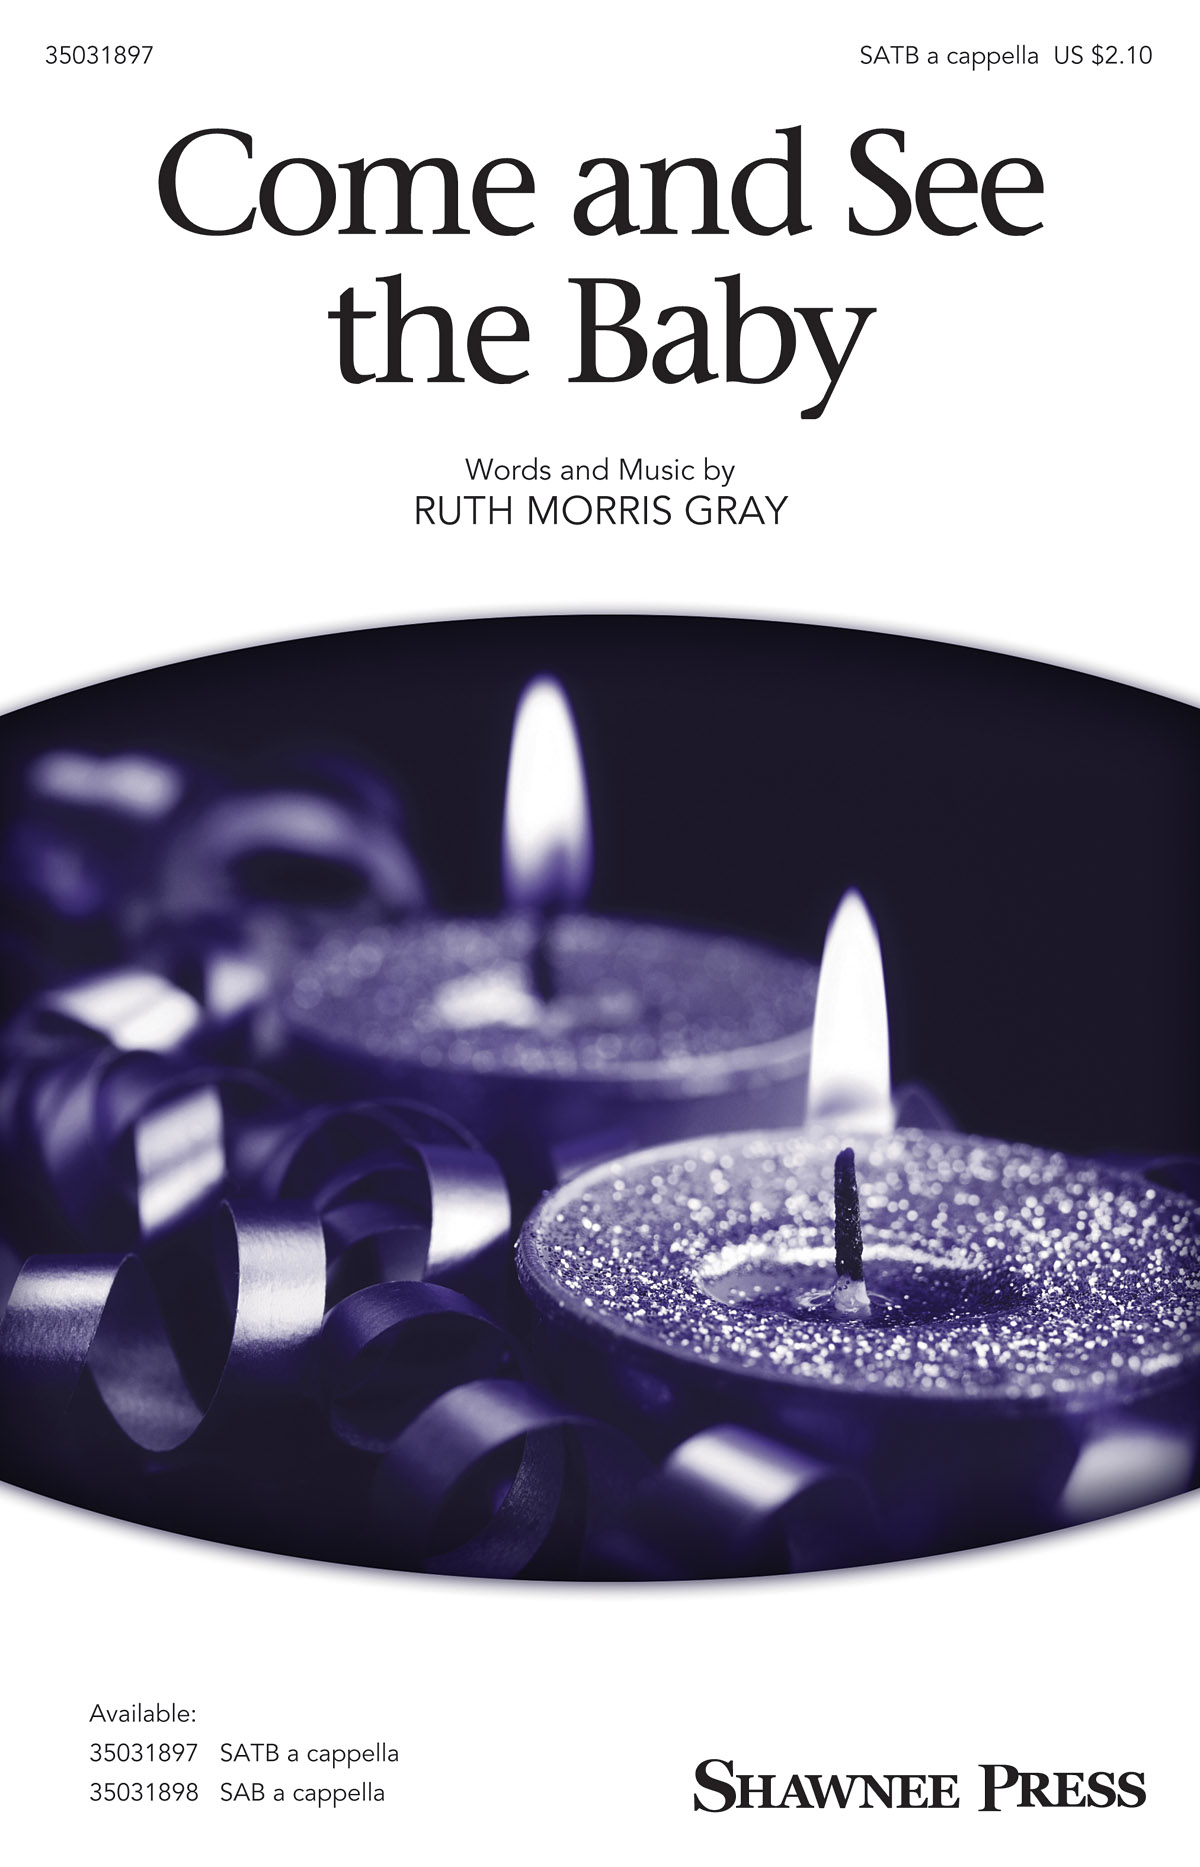 Ruth Morris Gray: Come and See the Baby: SATB: Vocal Score